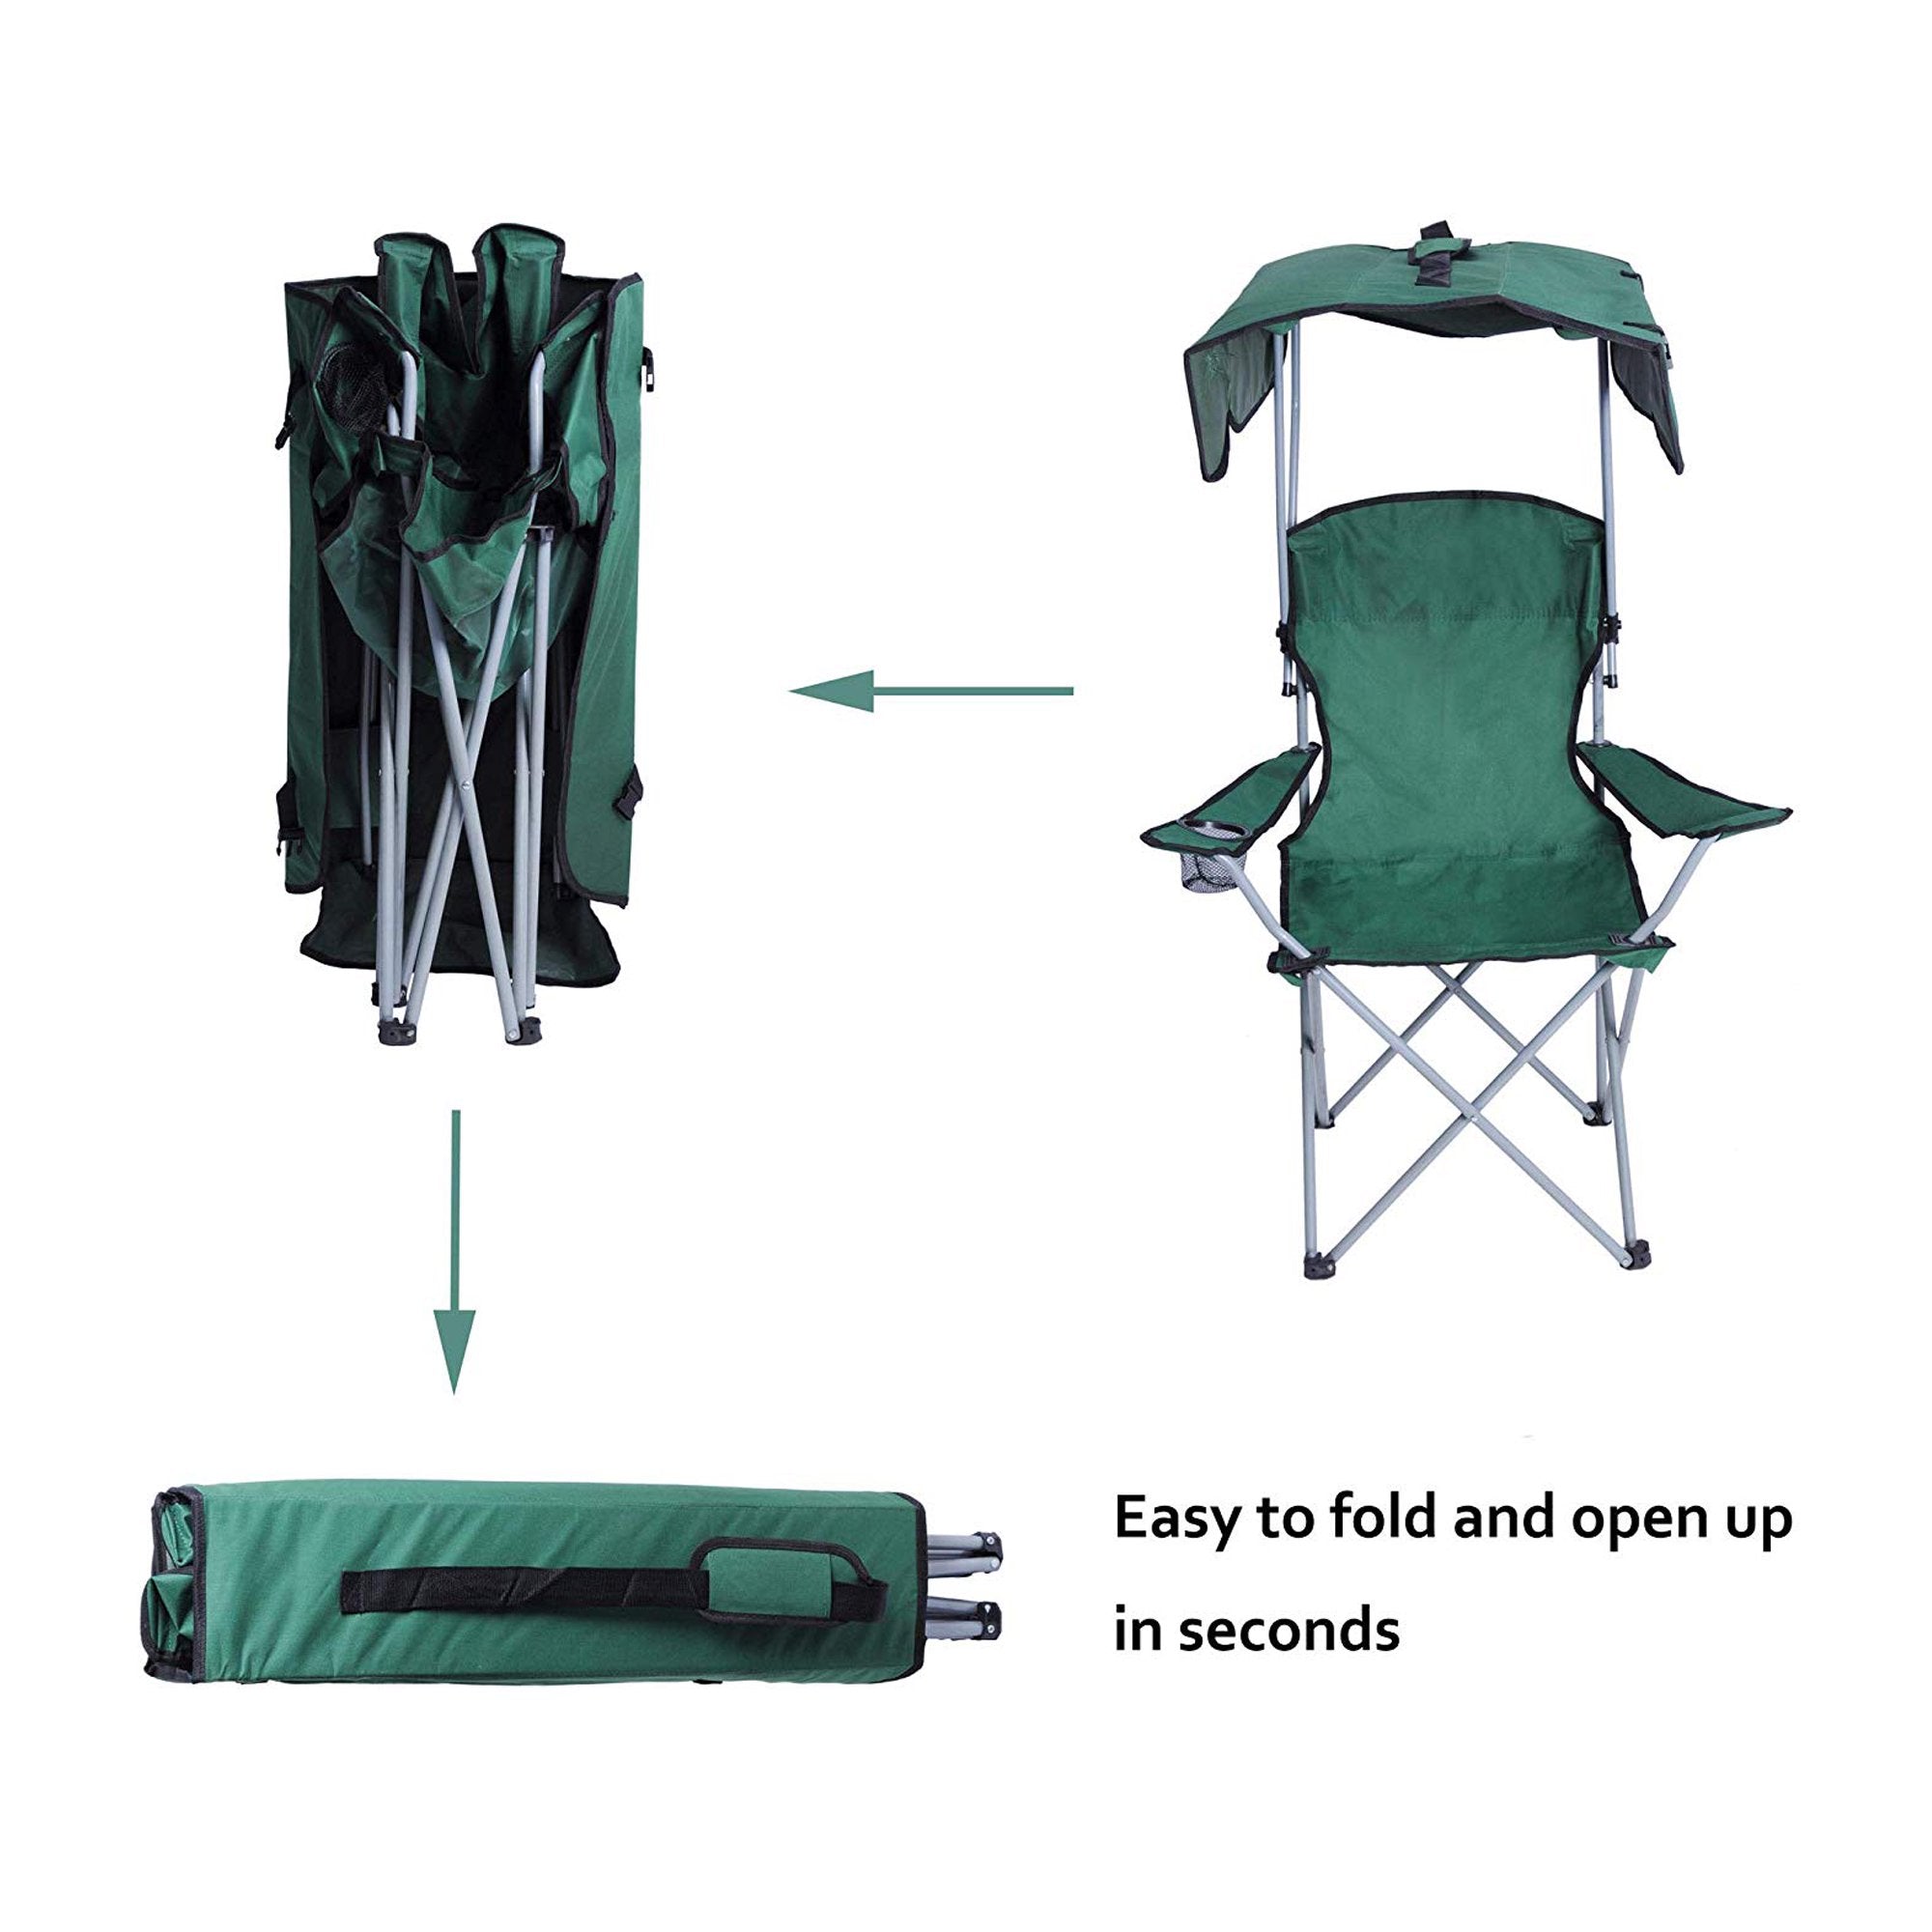 KARMAS PRODUCT Canopy Camping Fishing Beach Chair Folding Durable Sunscreen Outdoor Patio Lawn Seat with Cup Holder， Green